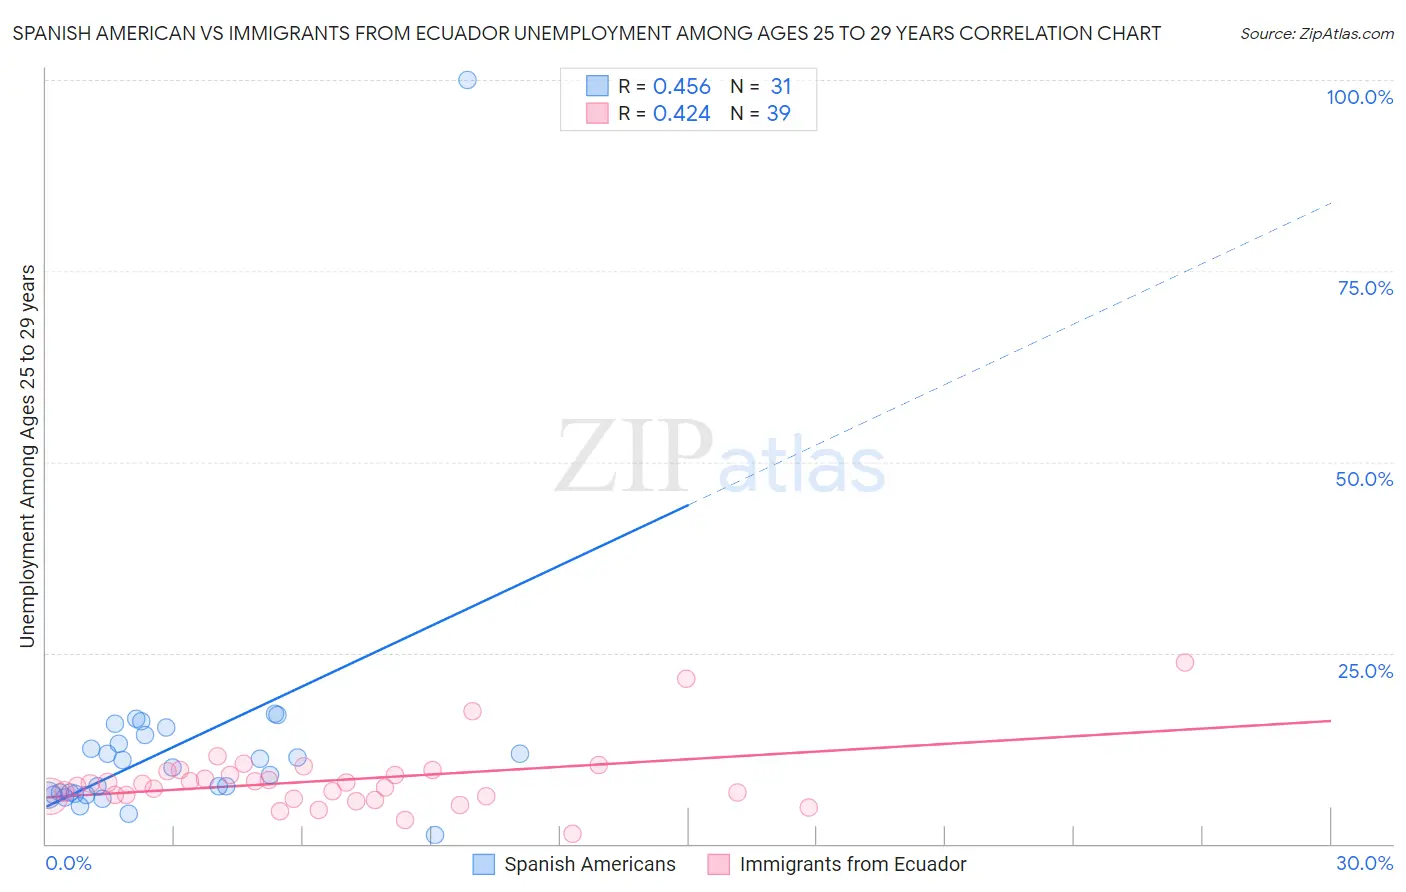 Spanish American vs Immigrants from Ecuador Unemployment Among Ages 25 to 29 years